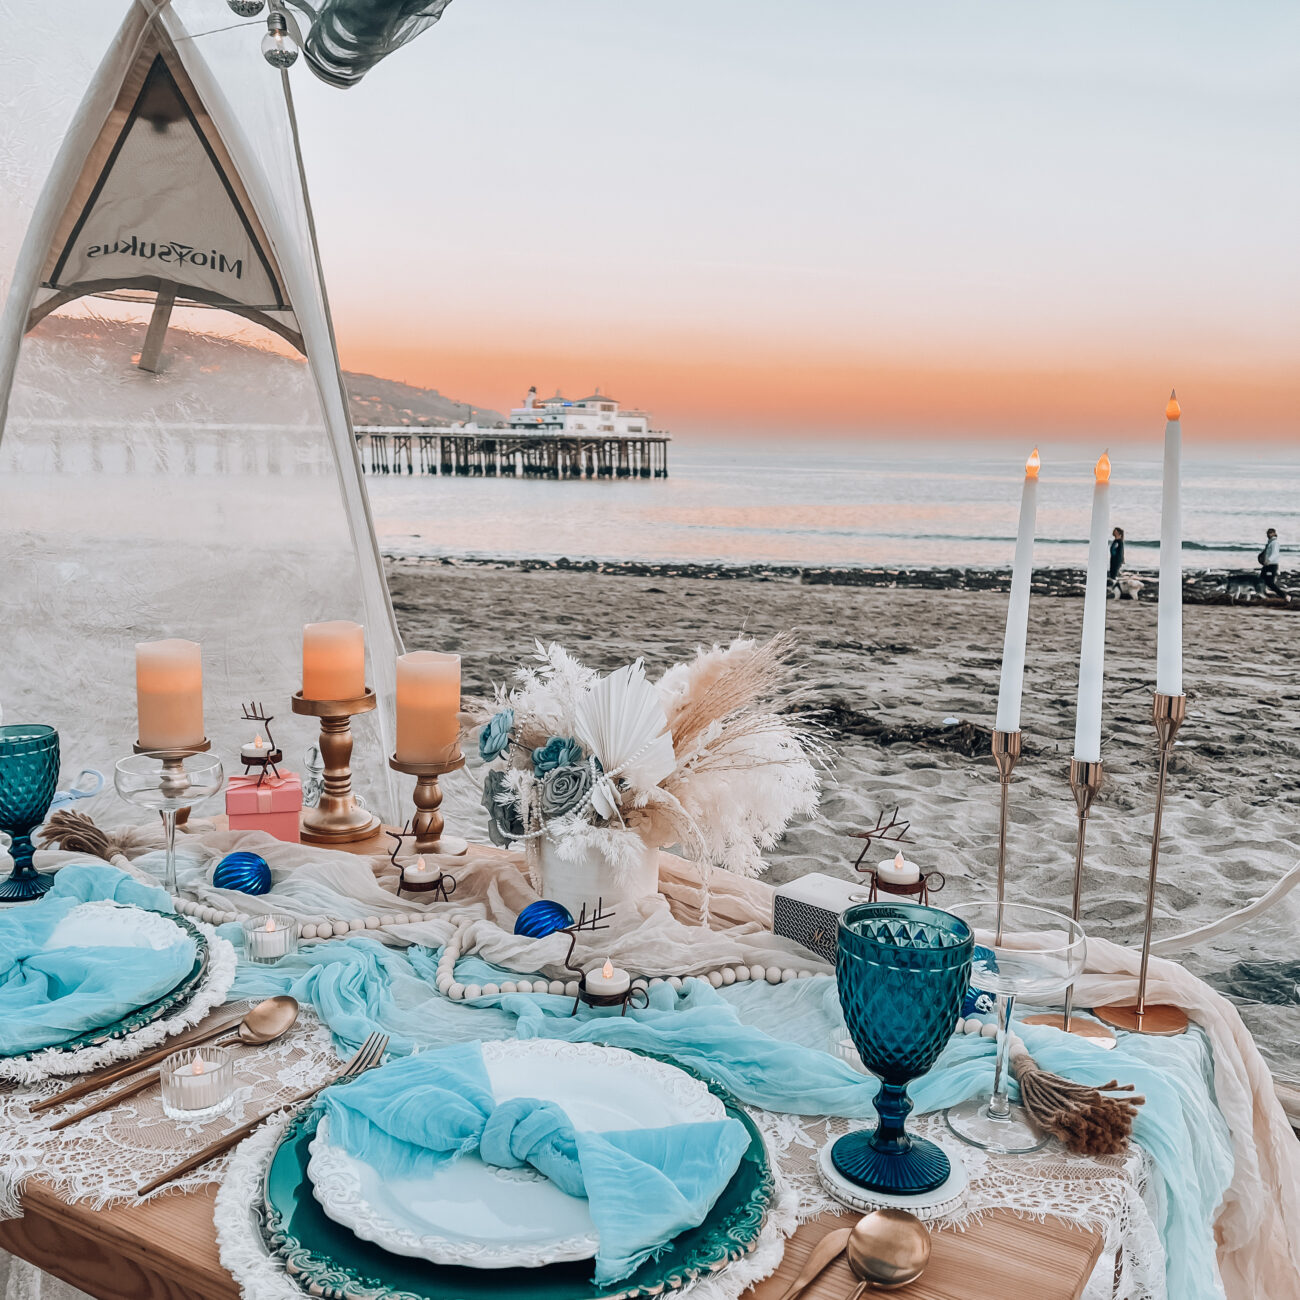 Pop-up picnic scene featuring flickering candles, an elegant dried flower arrangement, bubble tent and light blue drapes, with the Malibu Pier, ocean waves, and the sunset the backdrop.